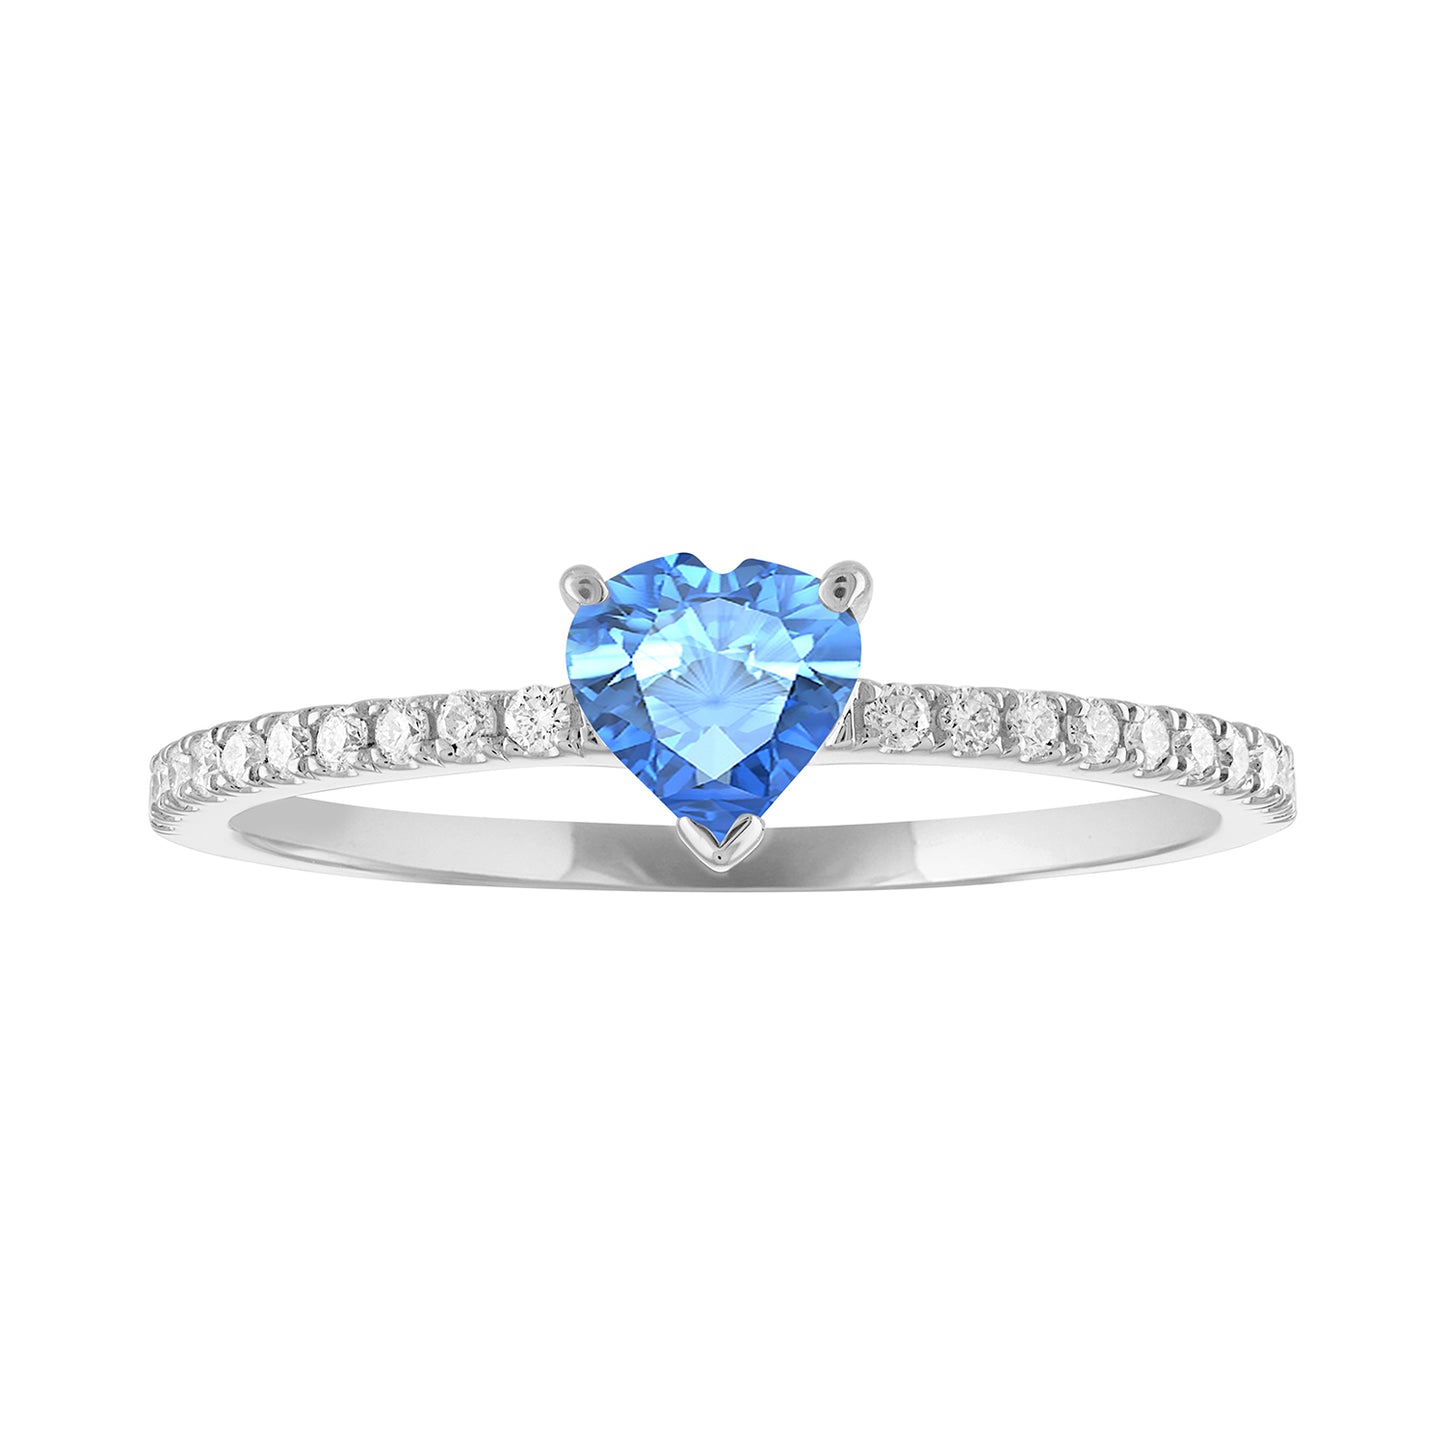 Thin banned white gold ring with heart shaped blue topaz and round diamonds on the shank